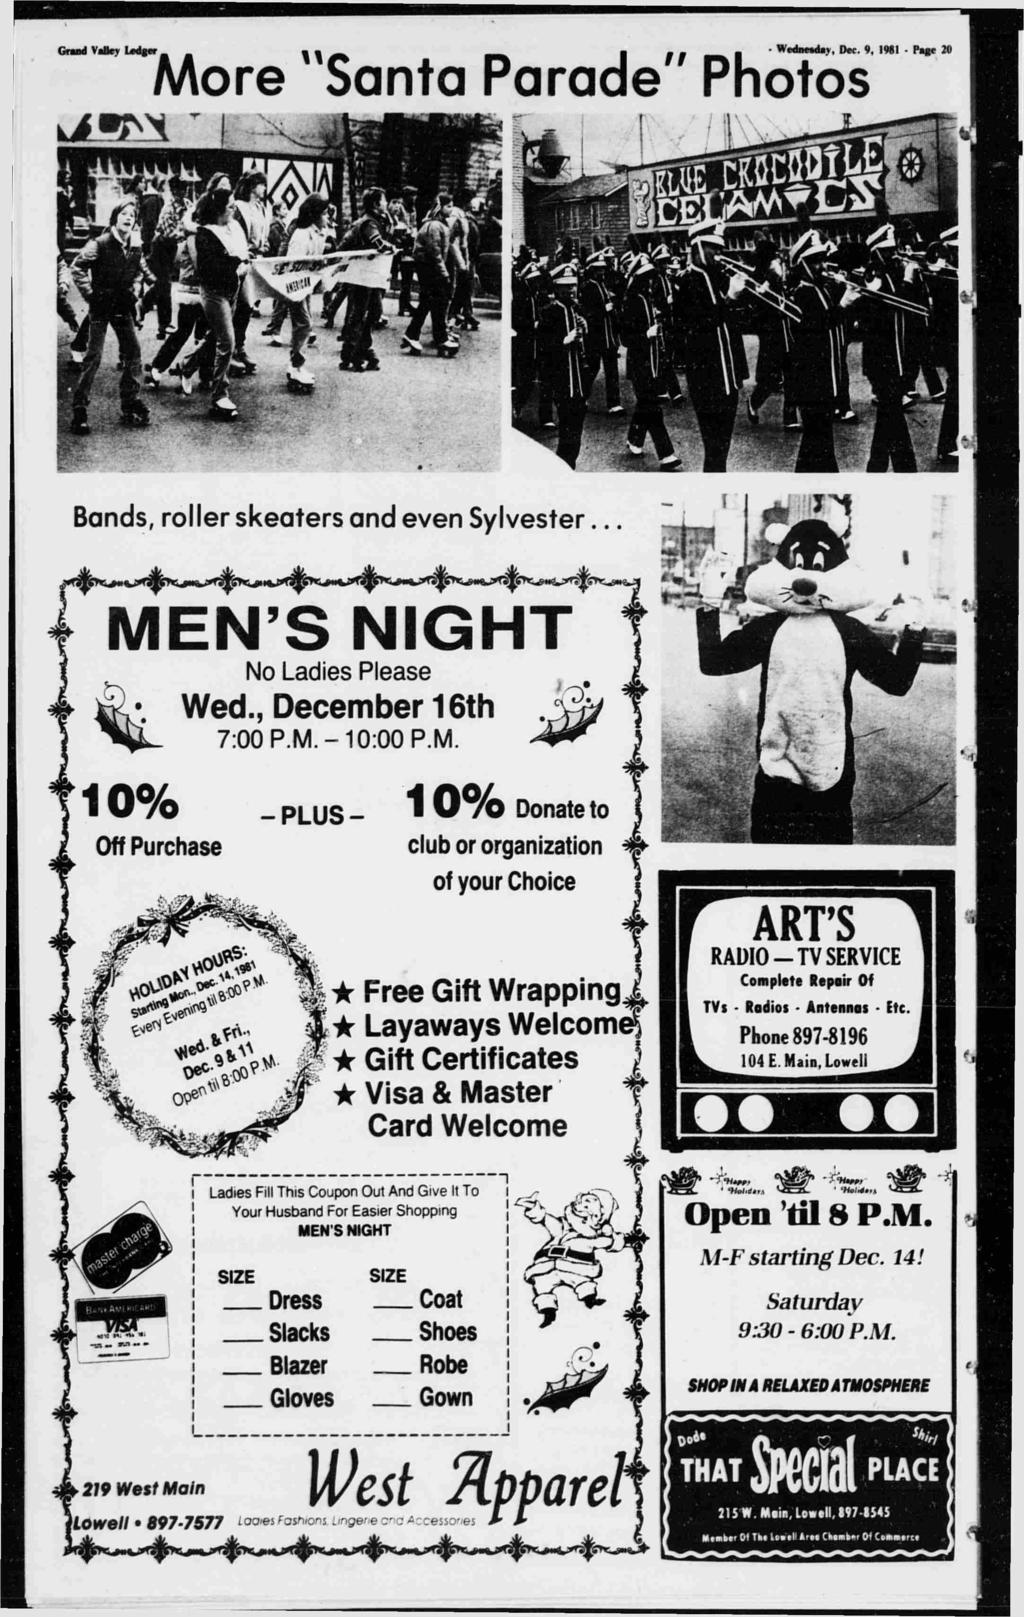 Gr Valkv Udgcr Wednesday, Dec. 9, 1981 - Page 20 More "Santa Parade" Photos Bs, roller skeaters even Sylvester. * MEN'S NGHT % No Lades Please Wed., December 16th 7:00 P.M.-10:00 P.M. 10% Off Purchase -PLUS- 1 0 % Donate to club or organzaton of your Choce Free Gft Wrappng Layaways Welcome?